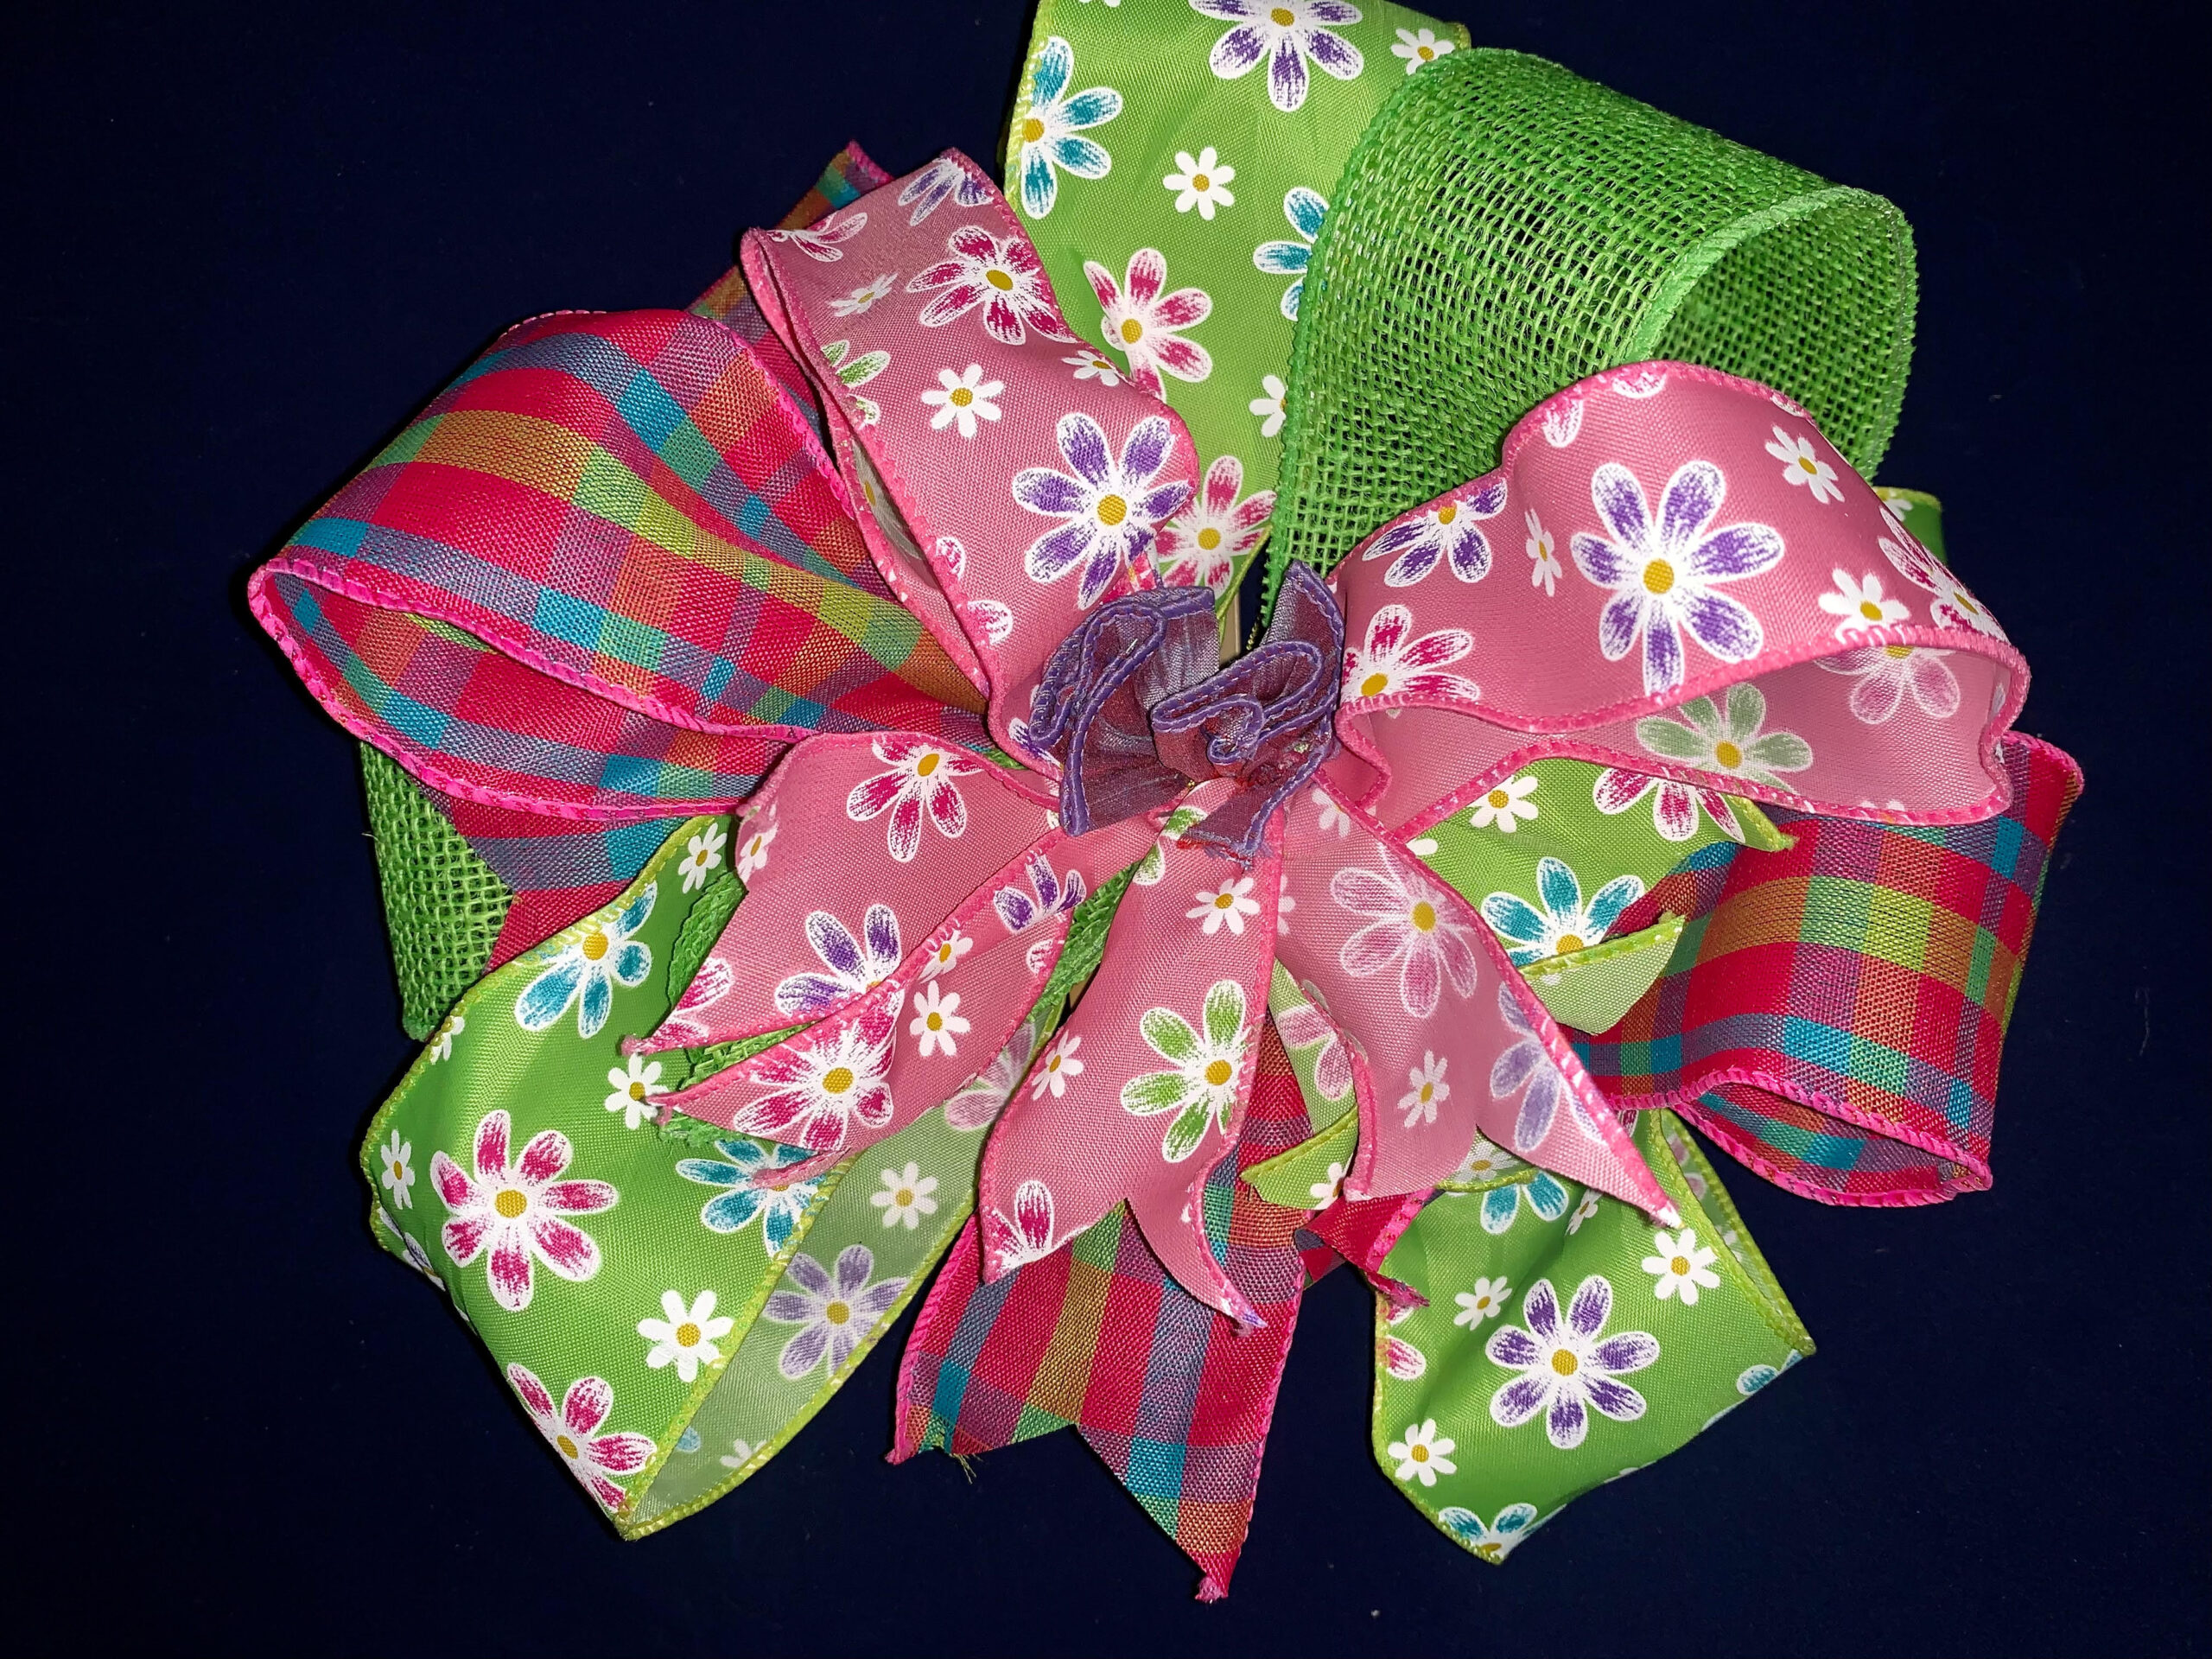 How to Make a Bow - INSTRUCTION - SMALL PROBOW 1 RIBBON - www